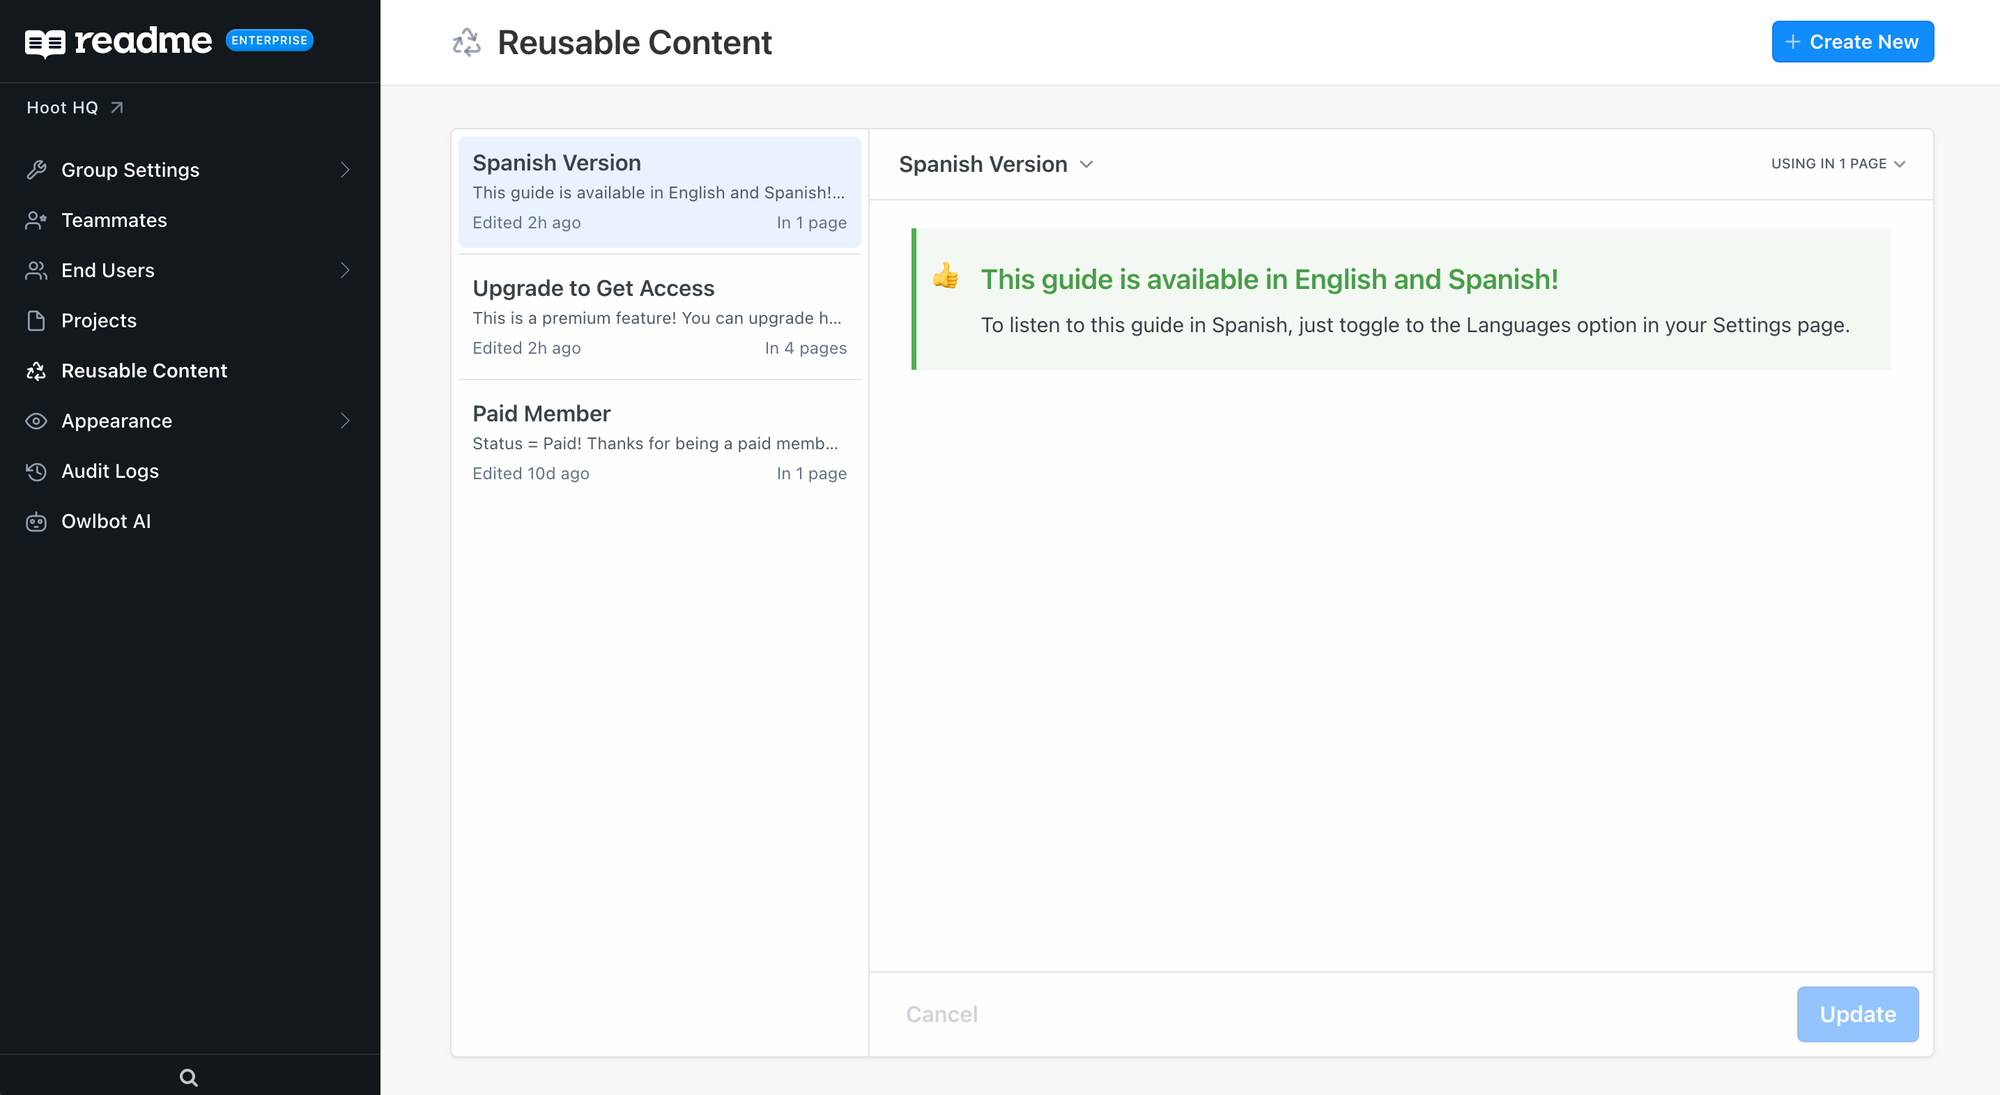 Edit Once, Update Everywhere: Reusable Content Comes to ReadMe